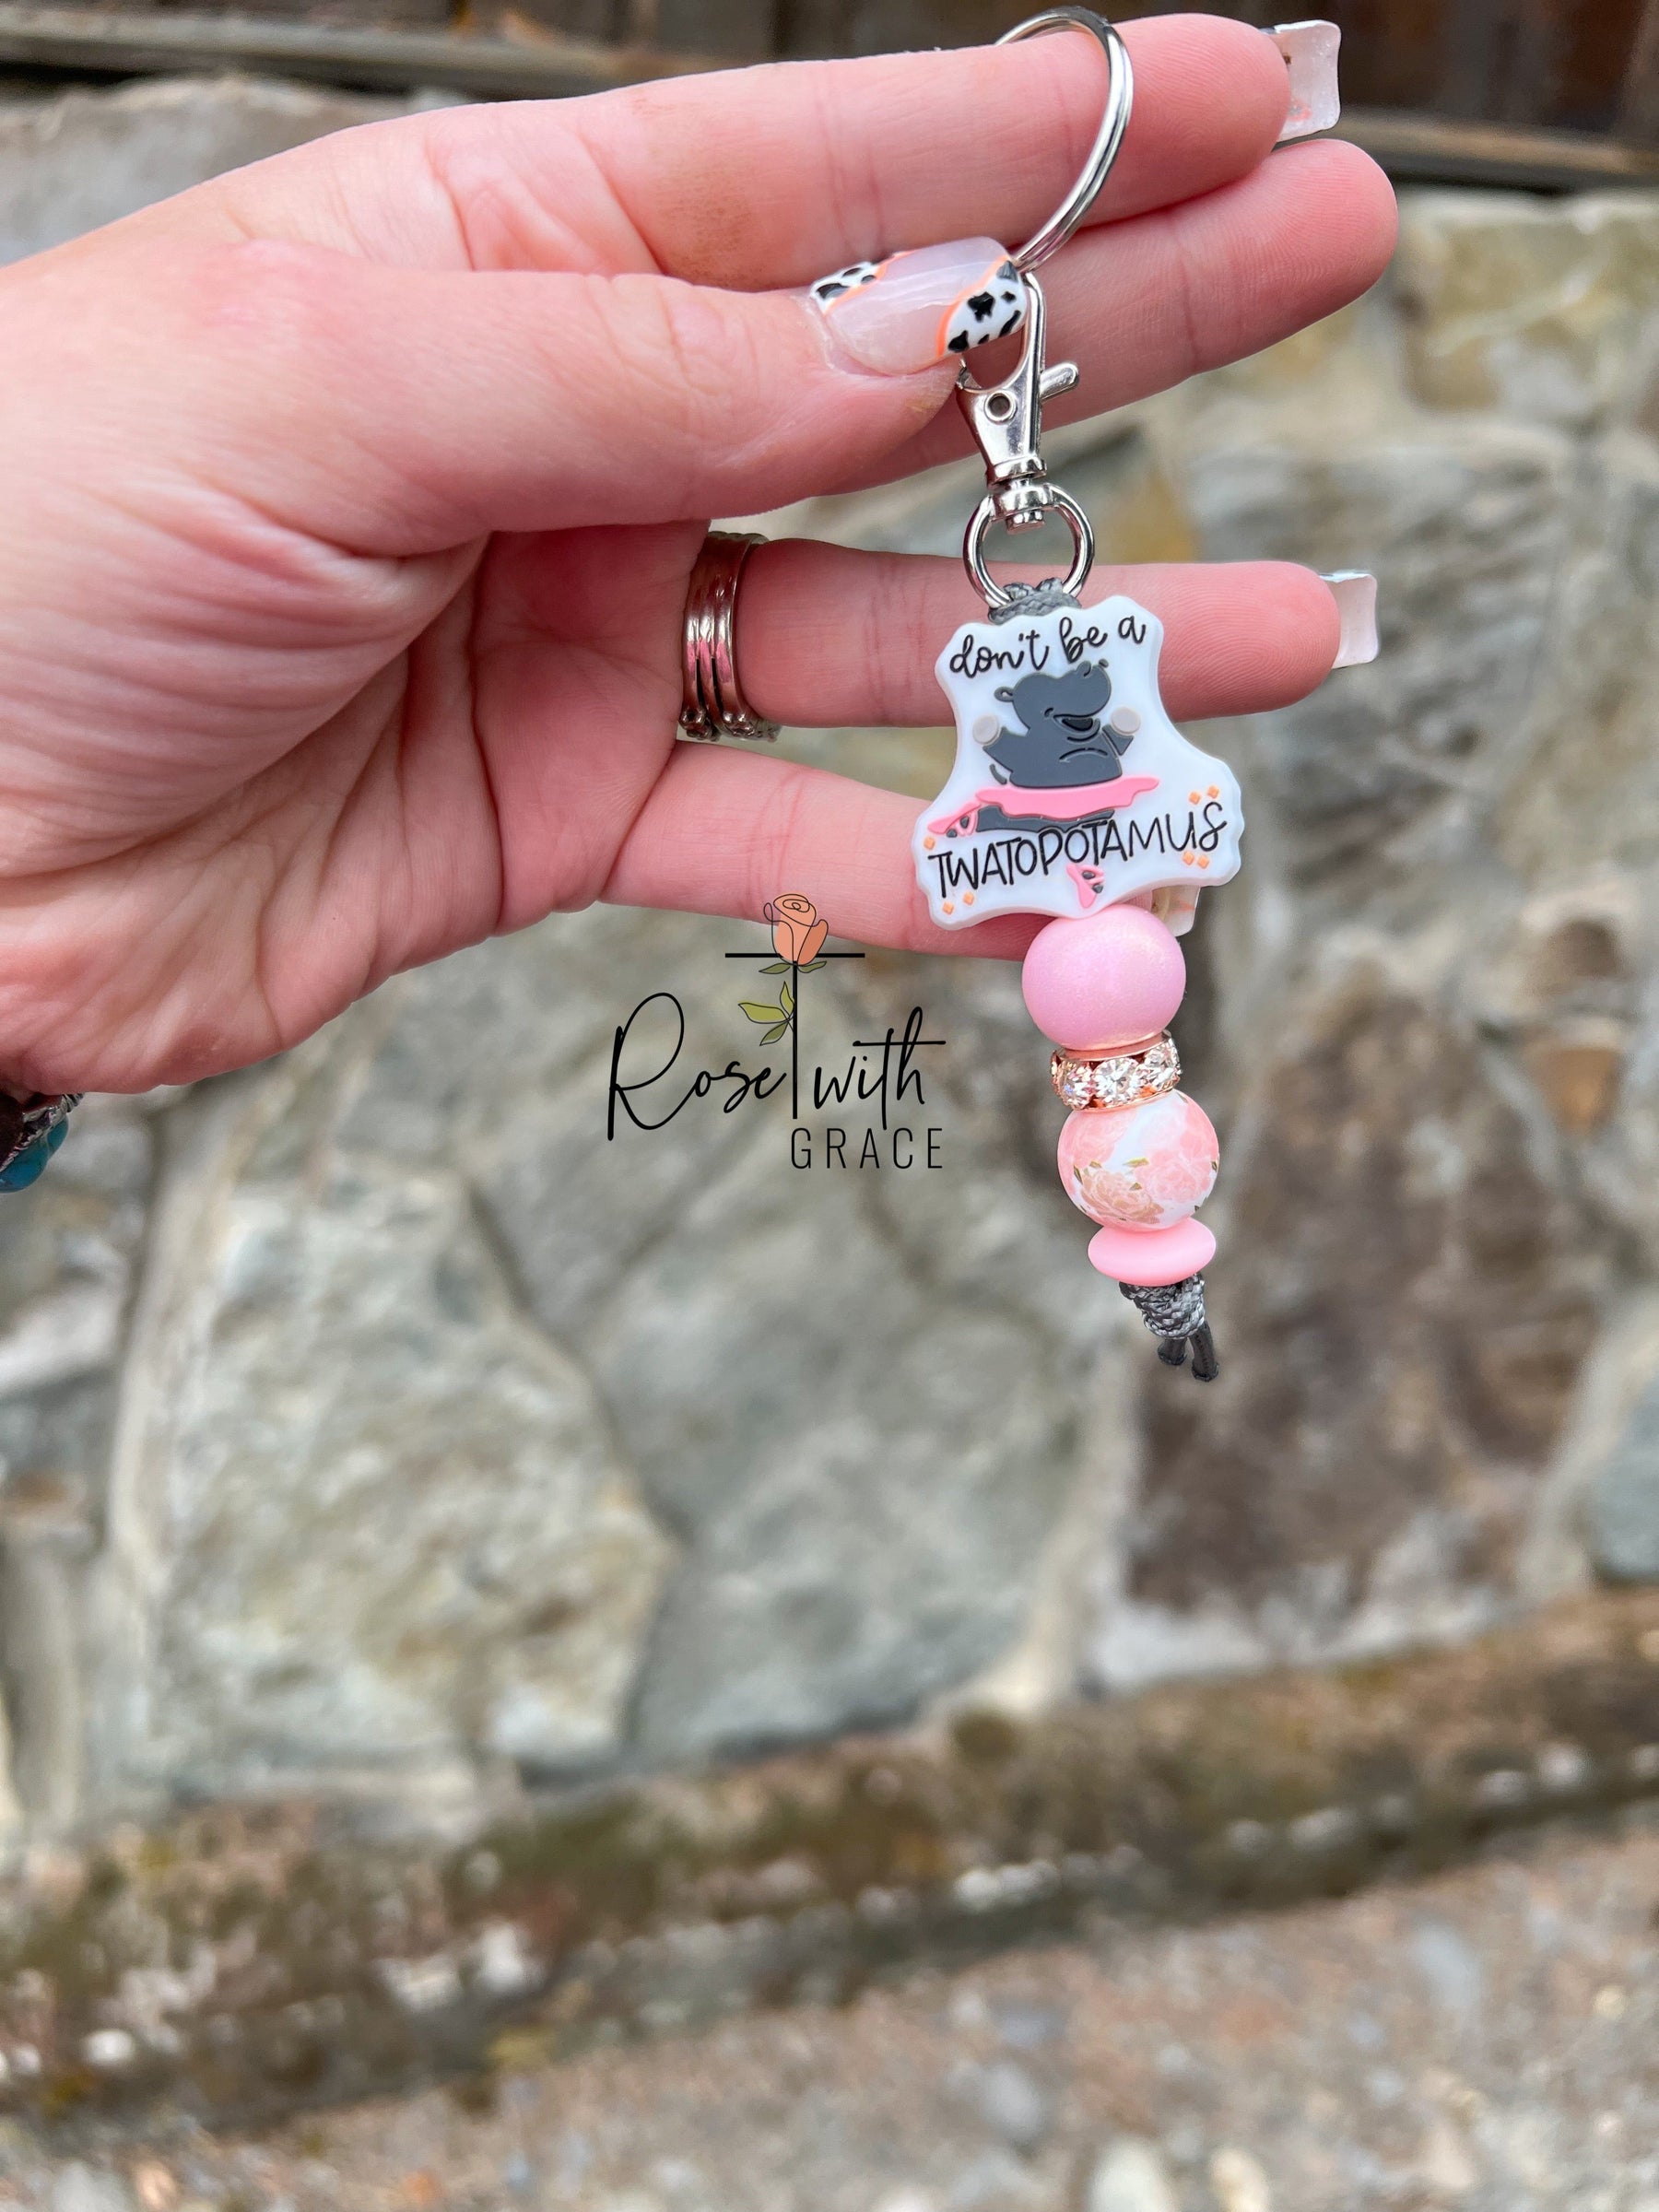 Don’t be a Twatopotomus- Mini Keychain Rose with Grace LLC